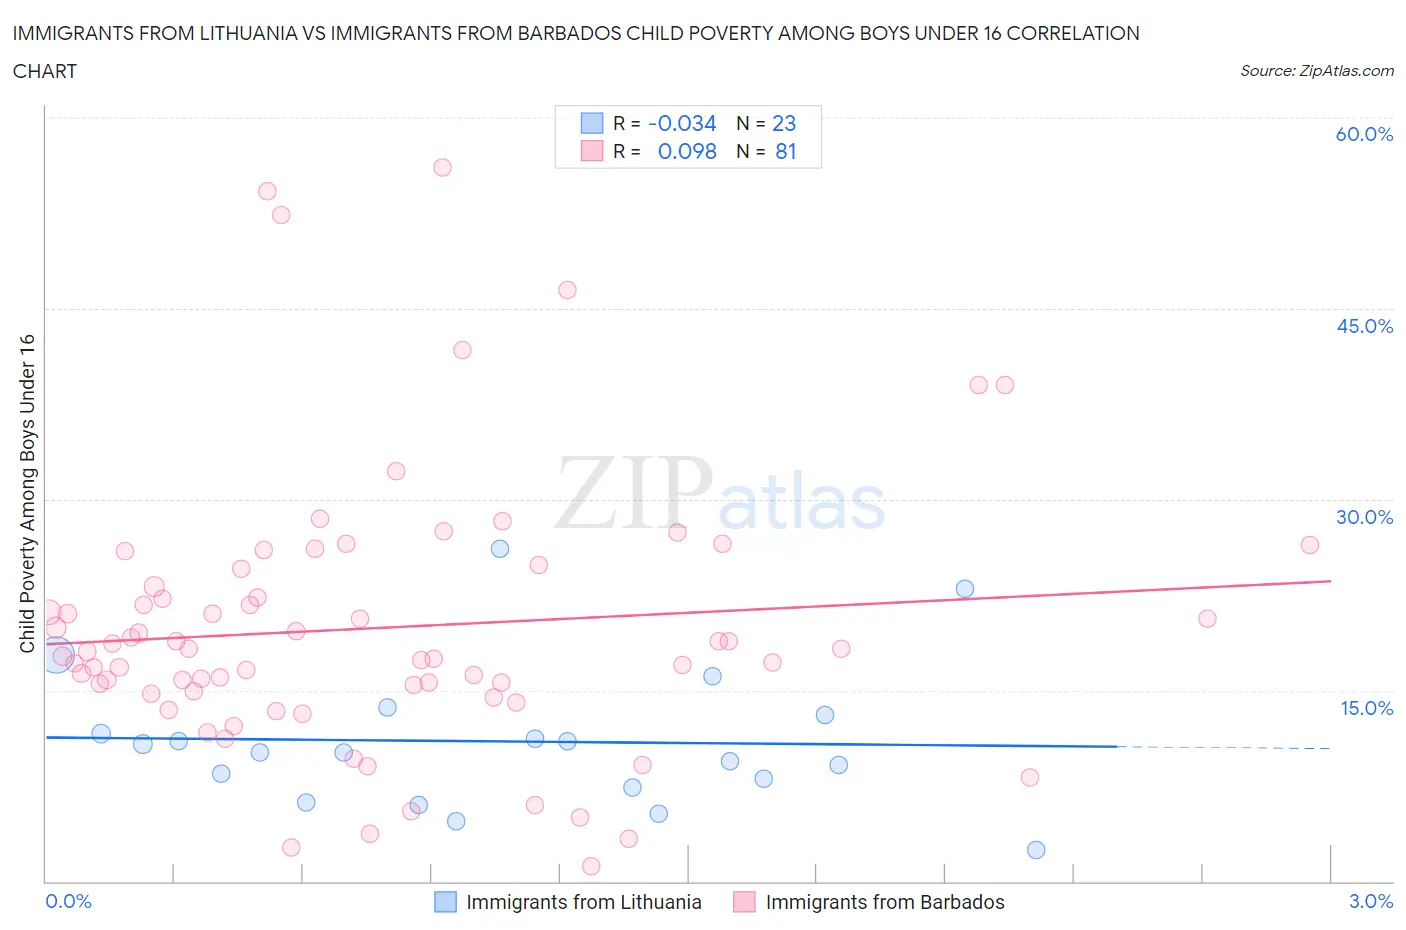 Immigrants from Lithuania vs Immigrants from Barbados Child Poverty Among Boys Under 16